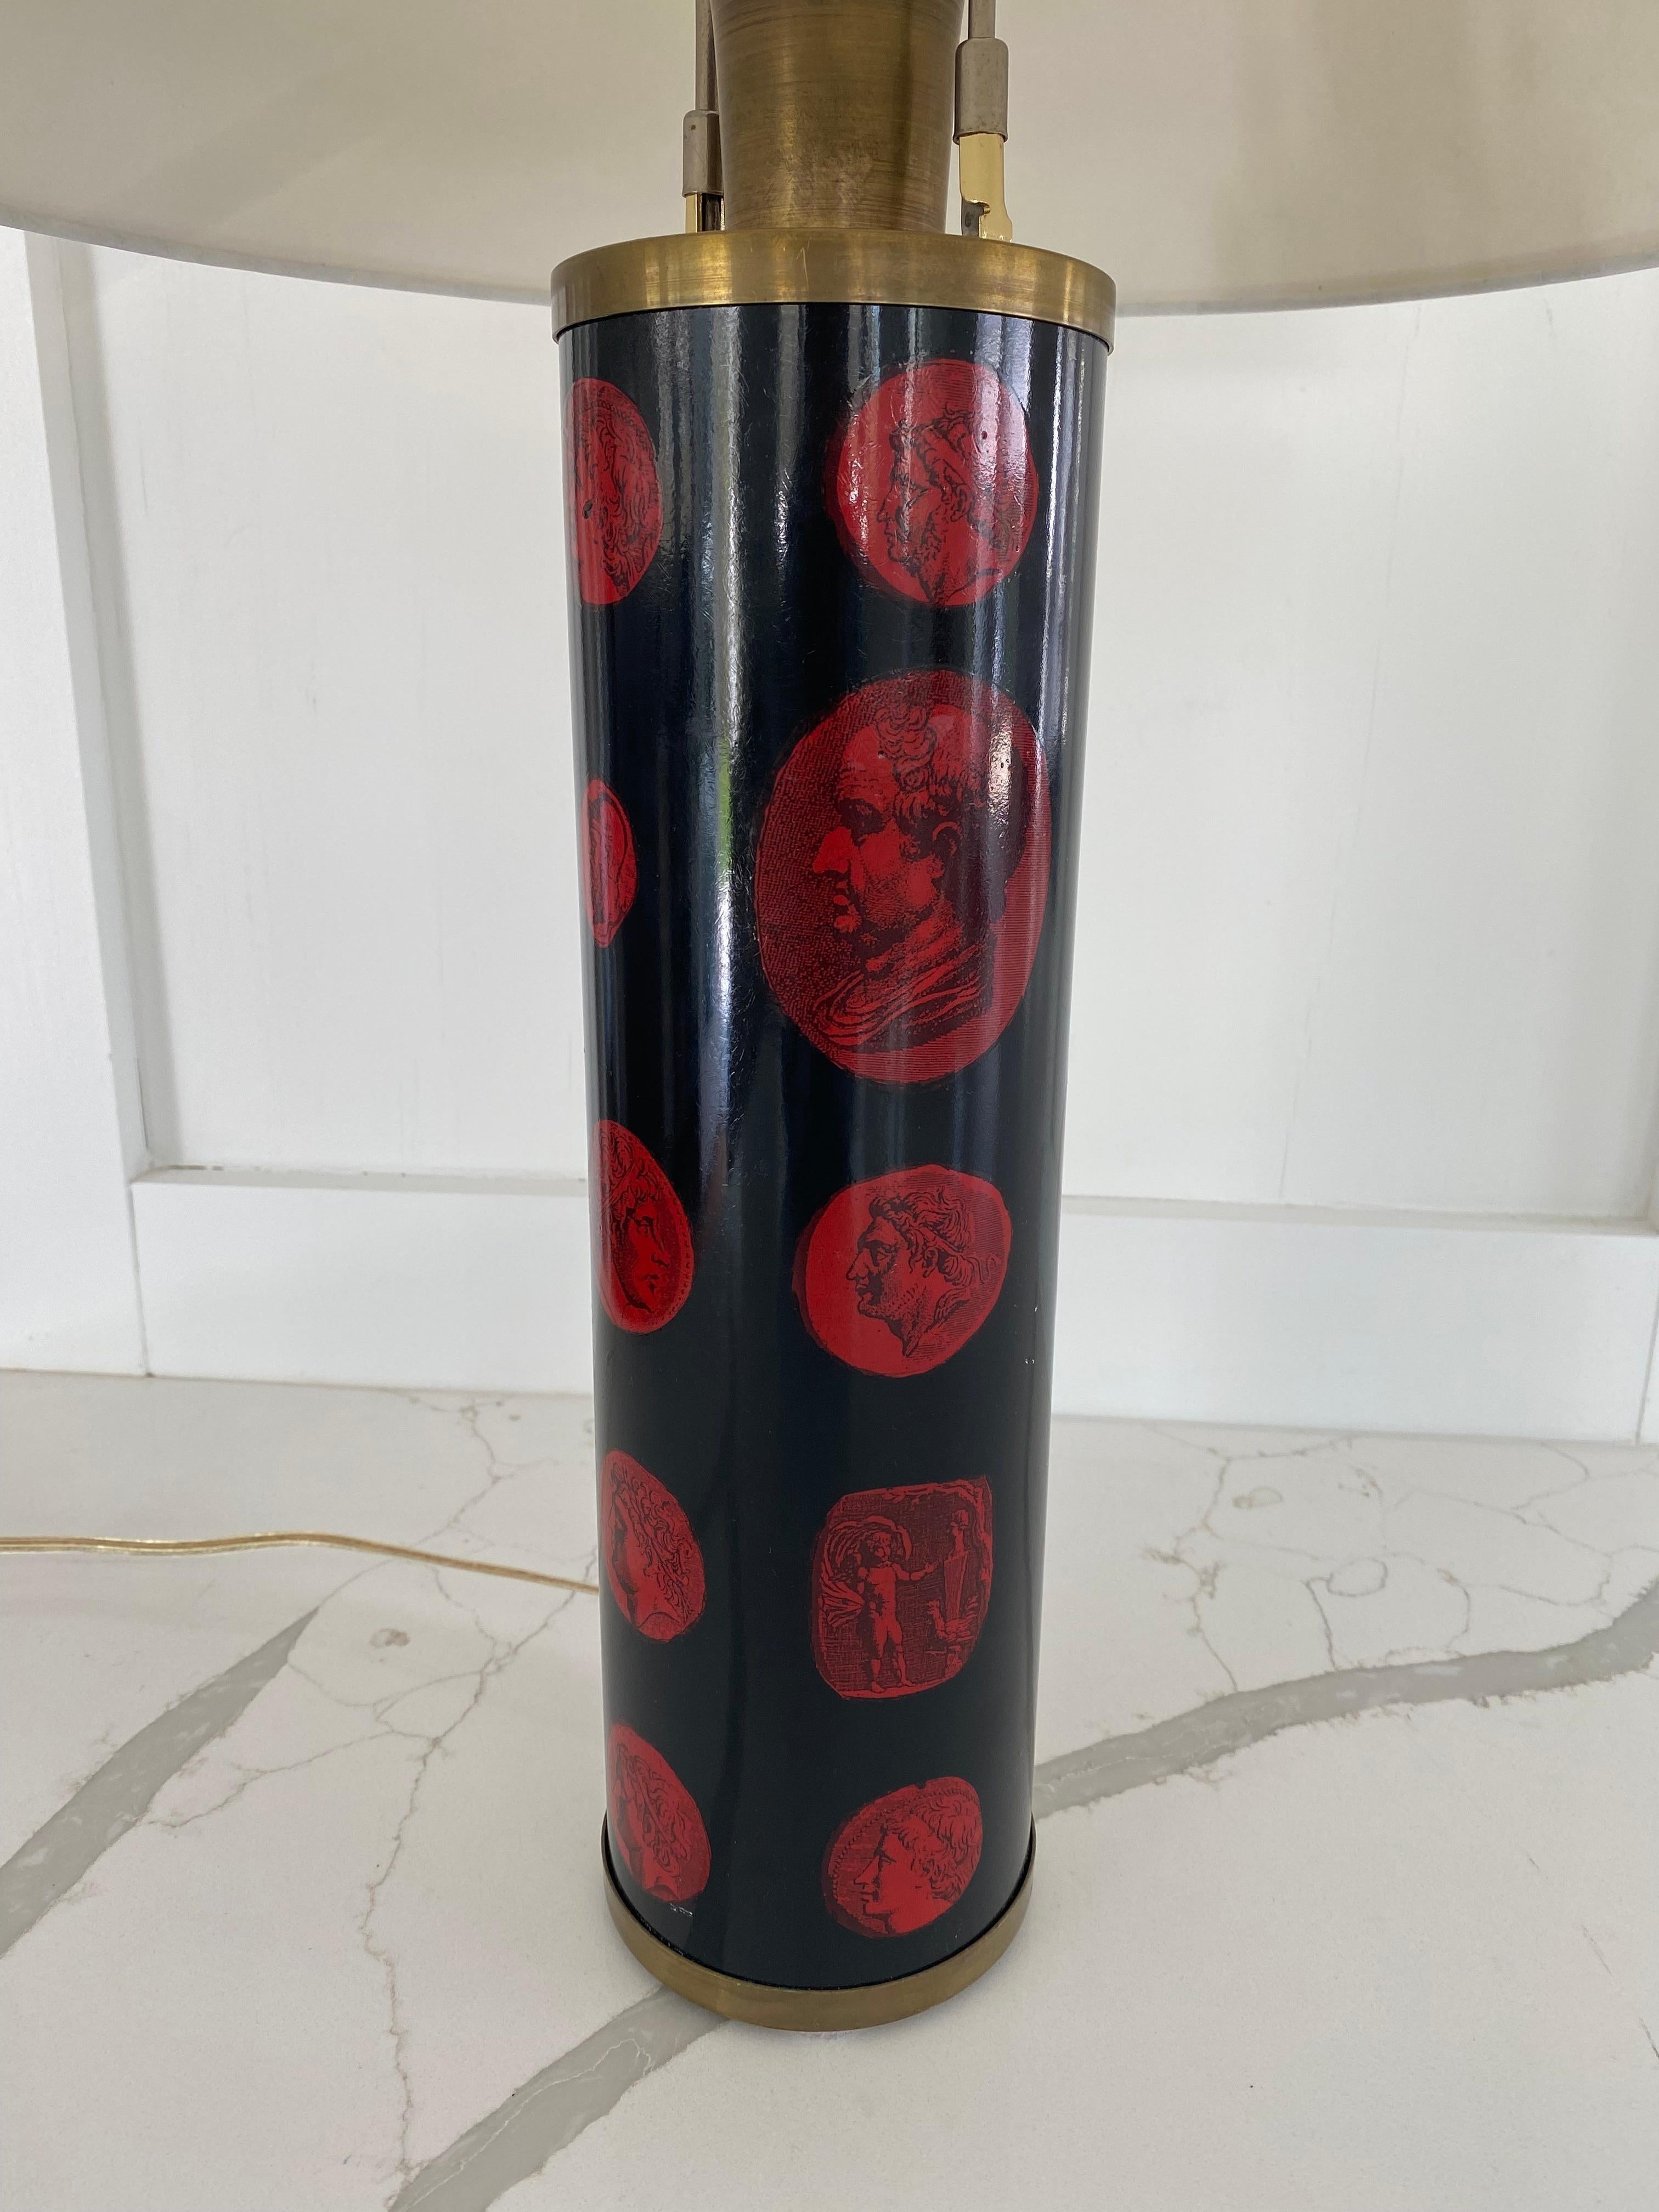 Classic Fornasetti lamp with black ground and red cameo pattern.